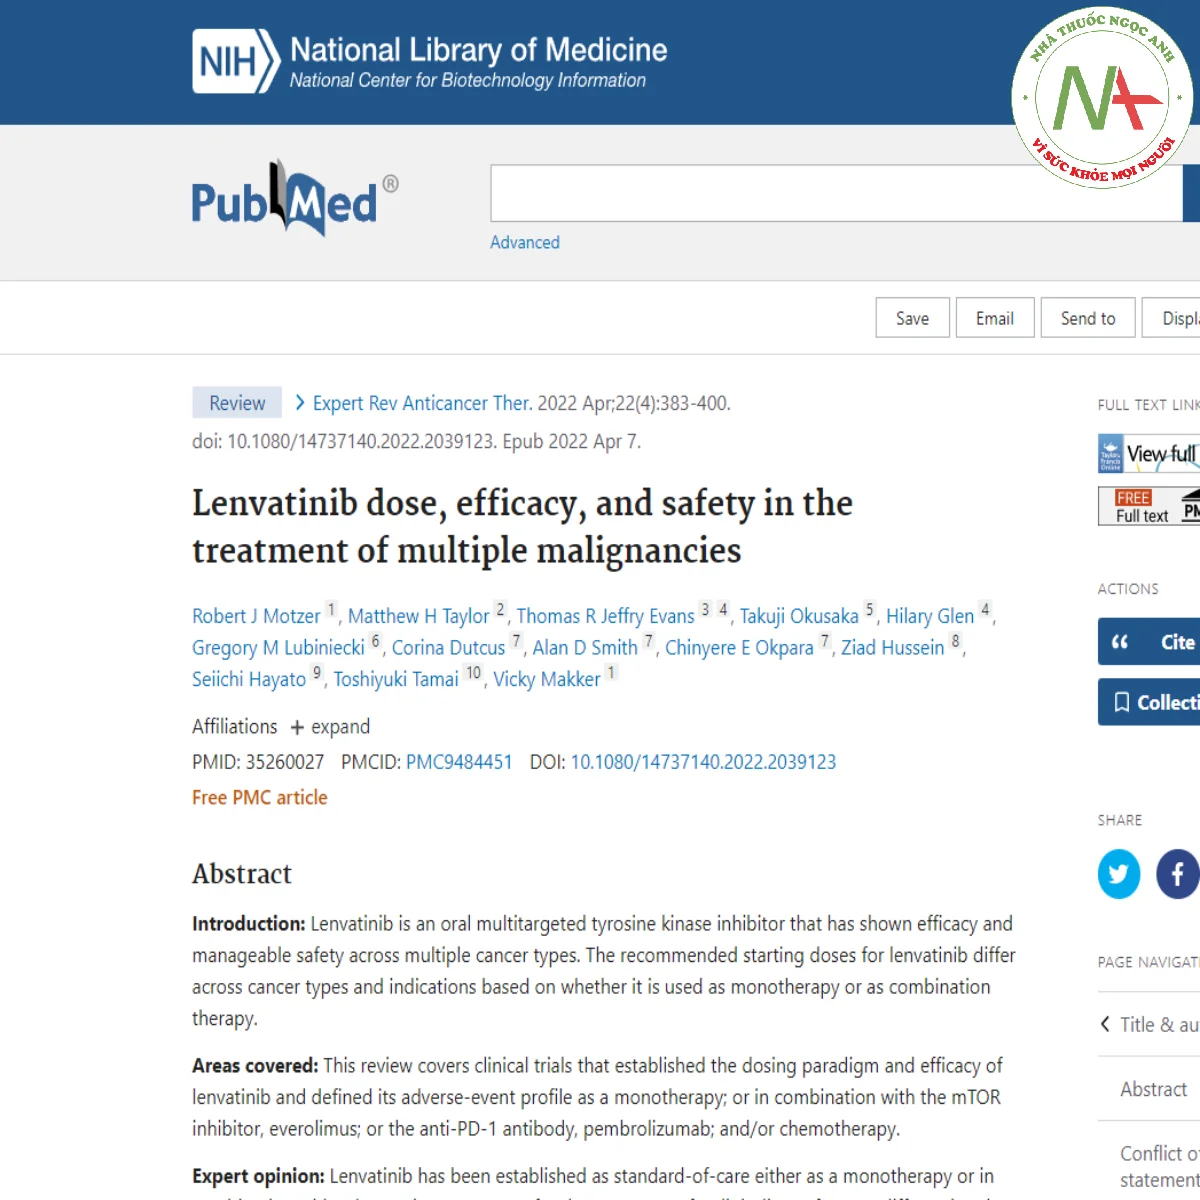 Lenvatinib dose, efficacy, and safety in the treatment of multiple malignancies